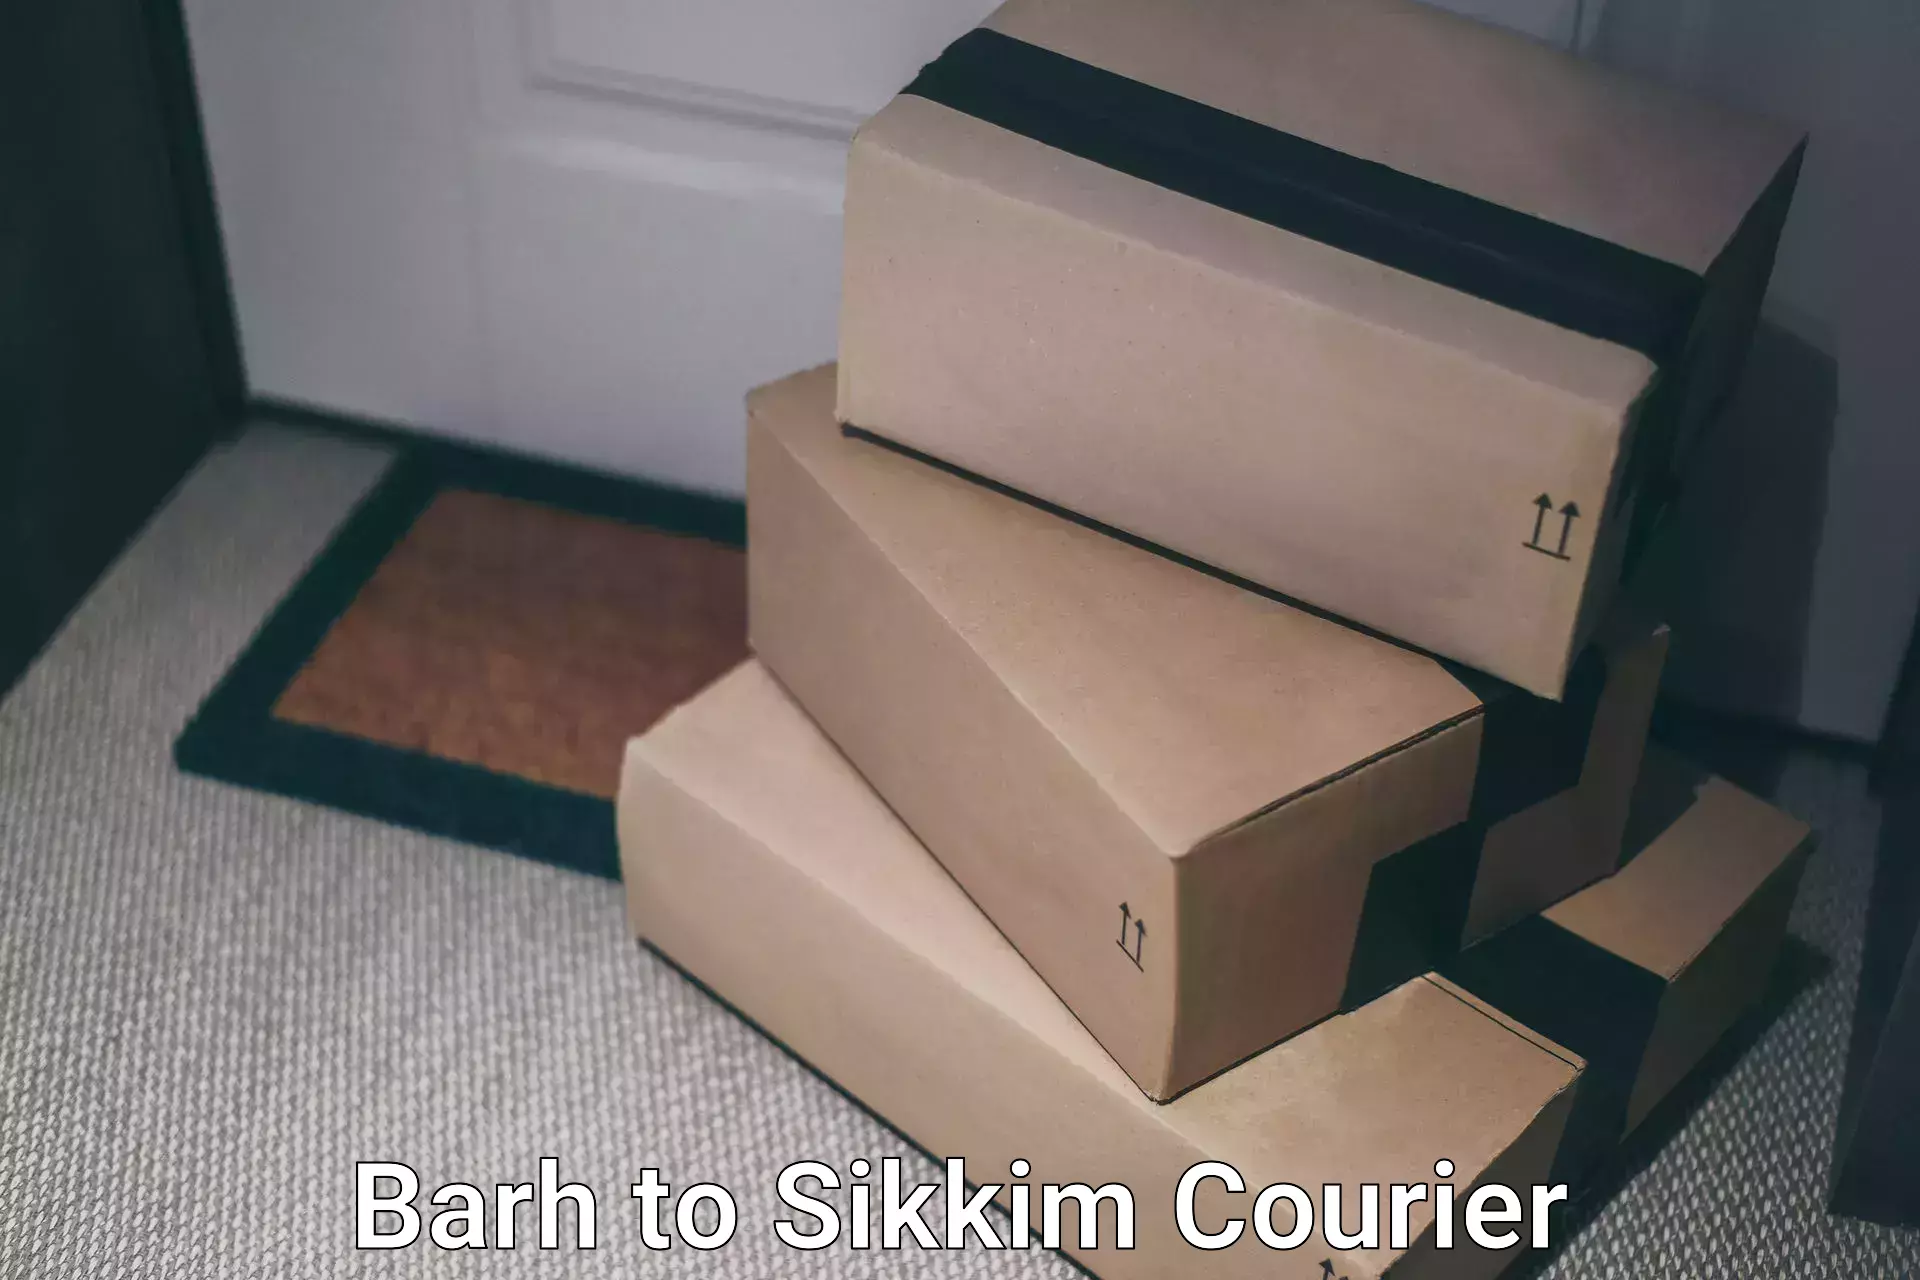 User-friendly delivery service Barh to Sikkim